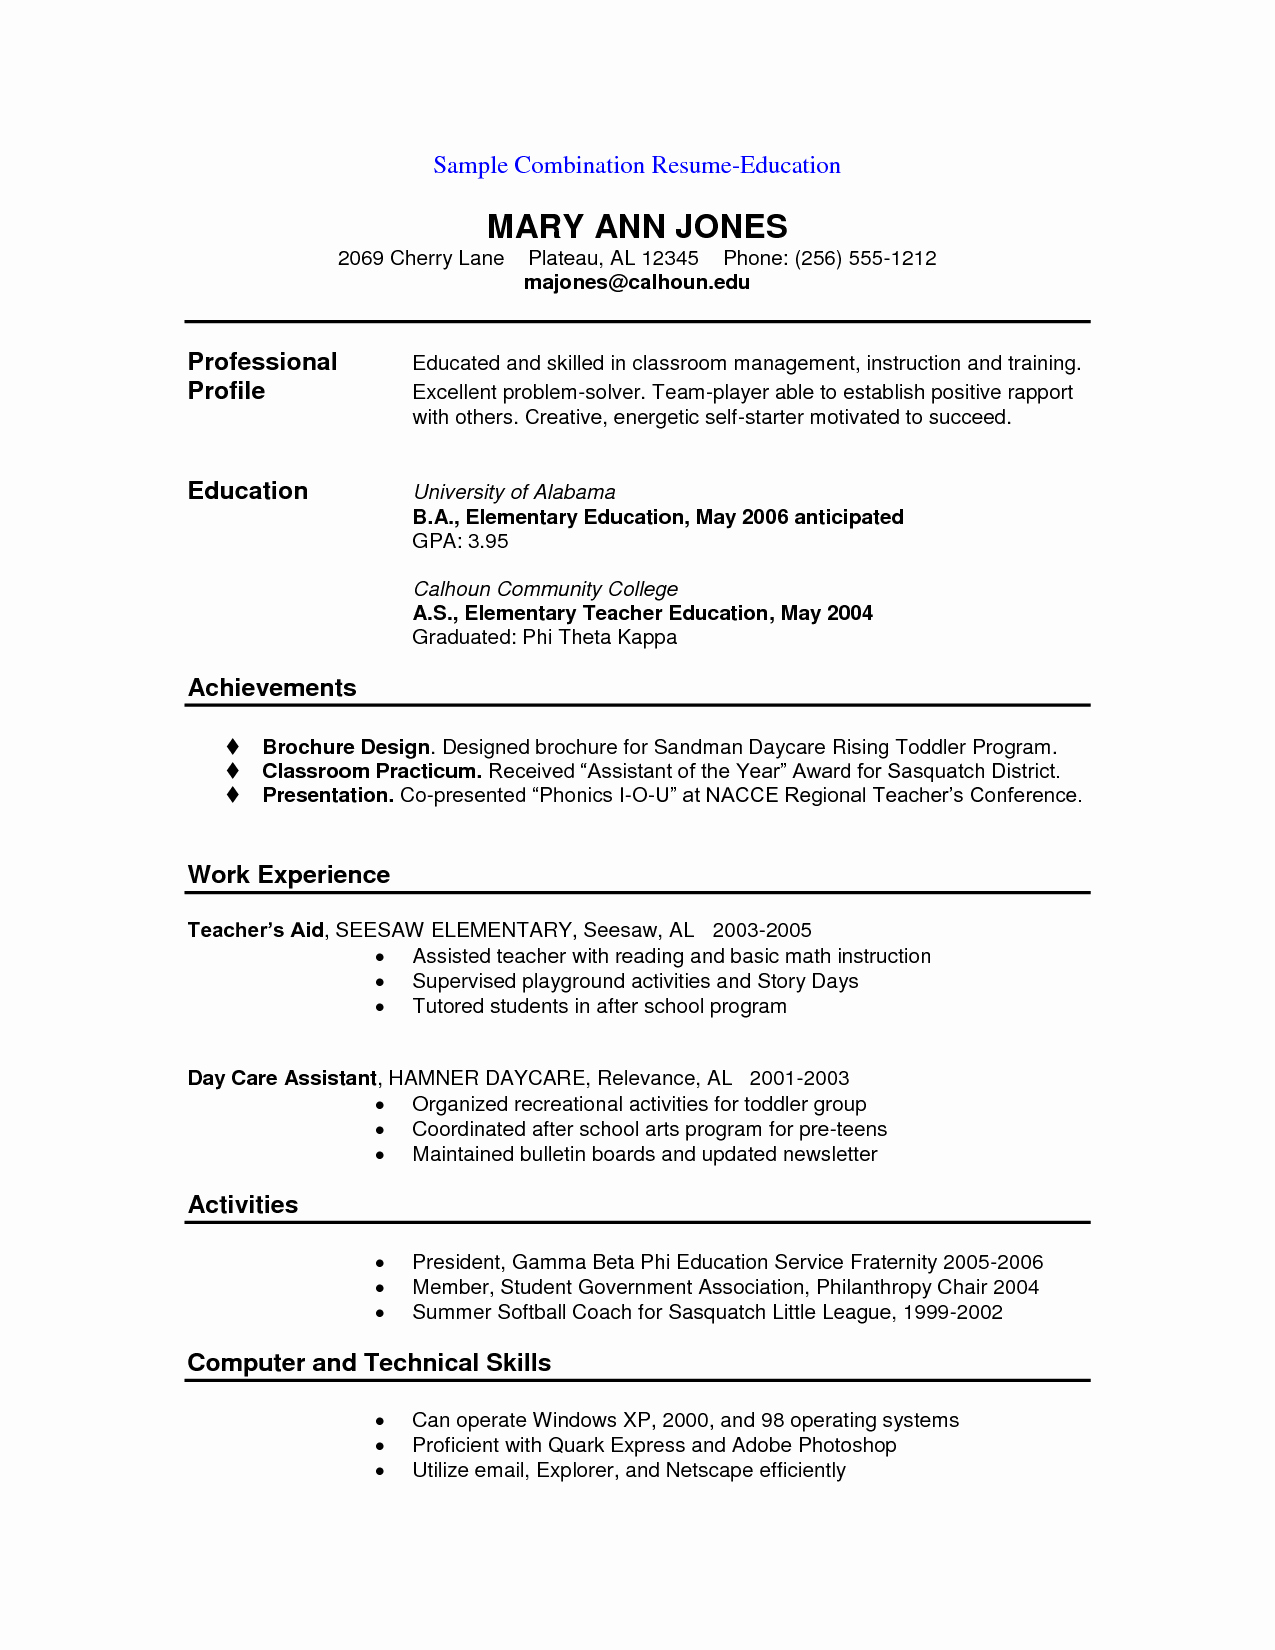 Functional Resume Template Template Functional Resume Template functional resume template|wikiresume.com